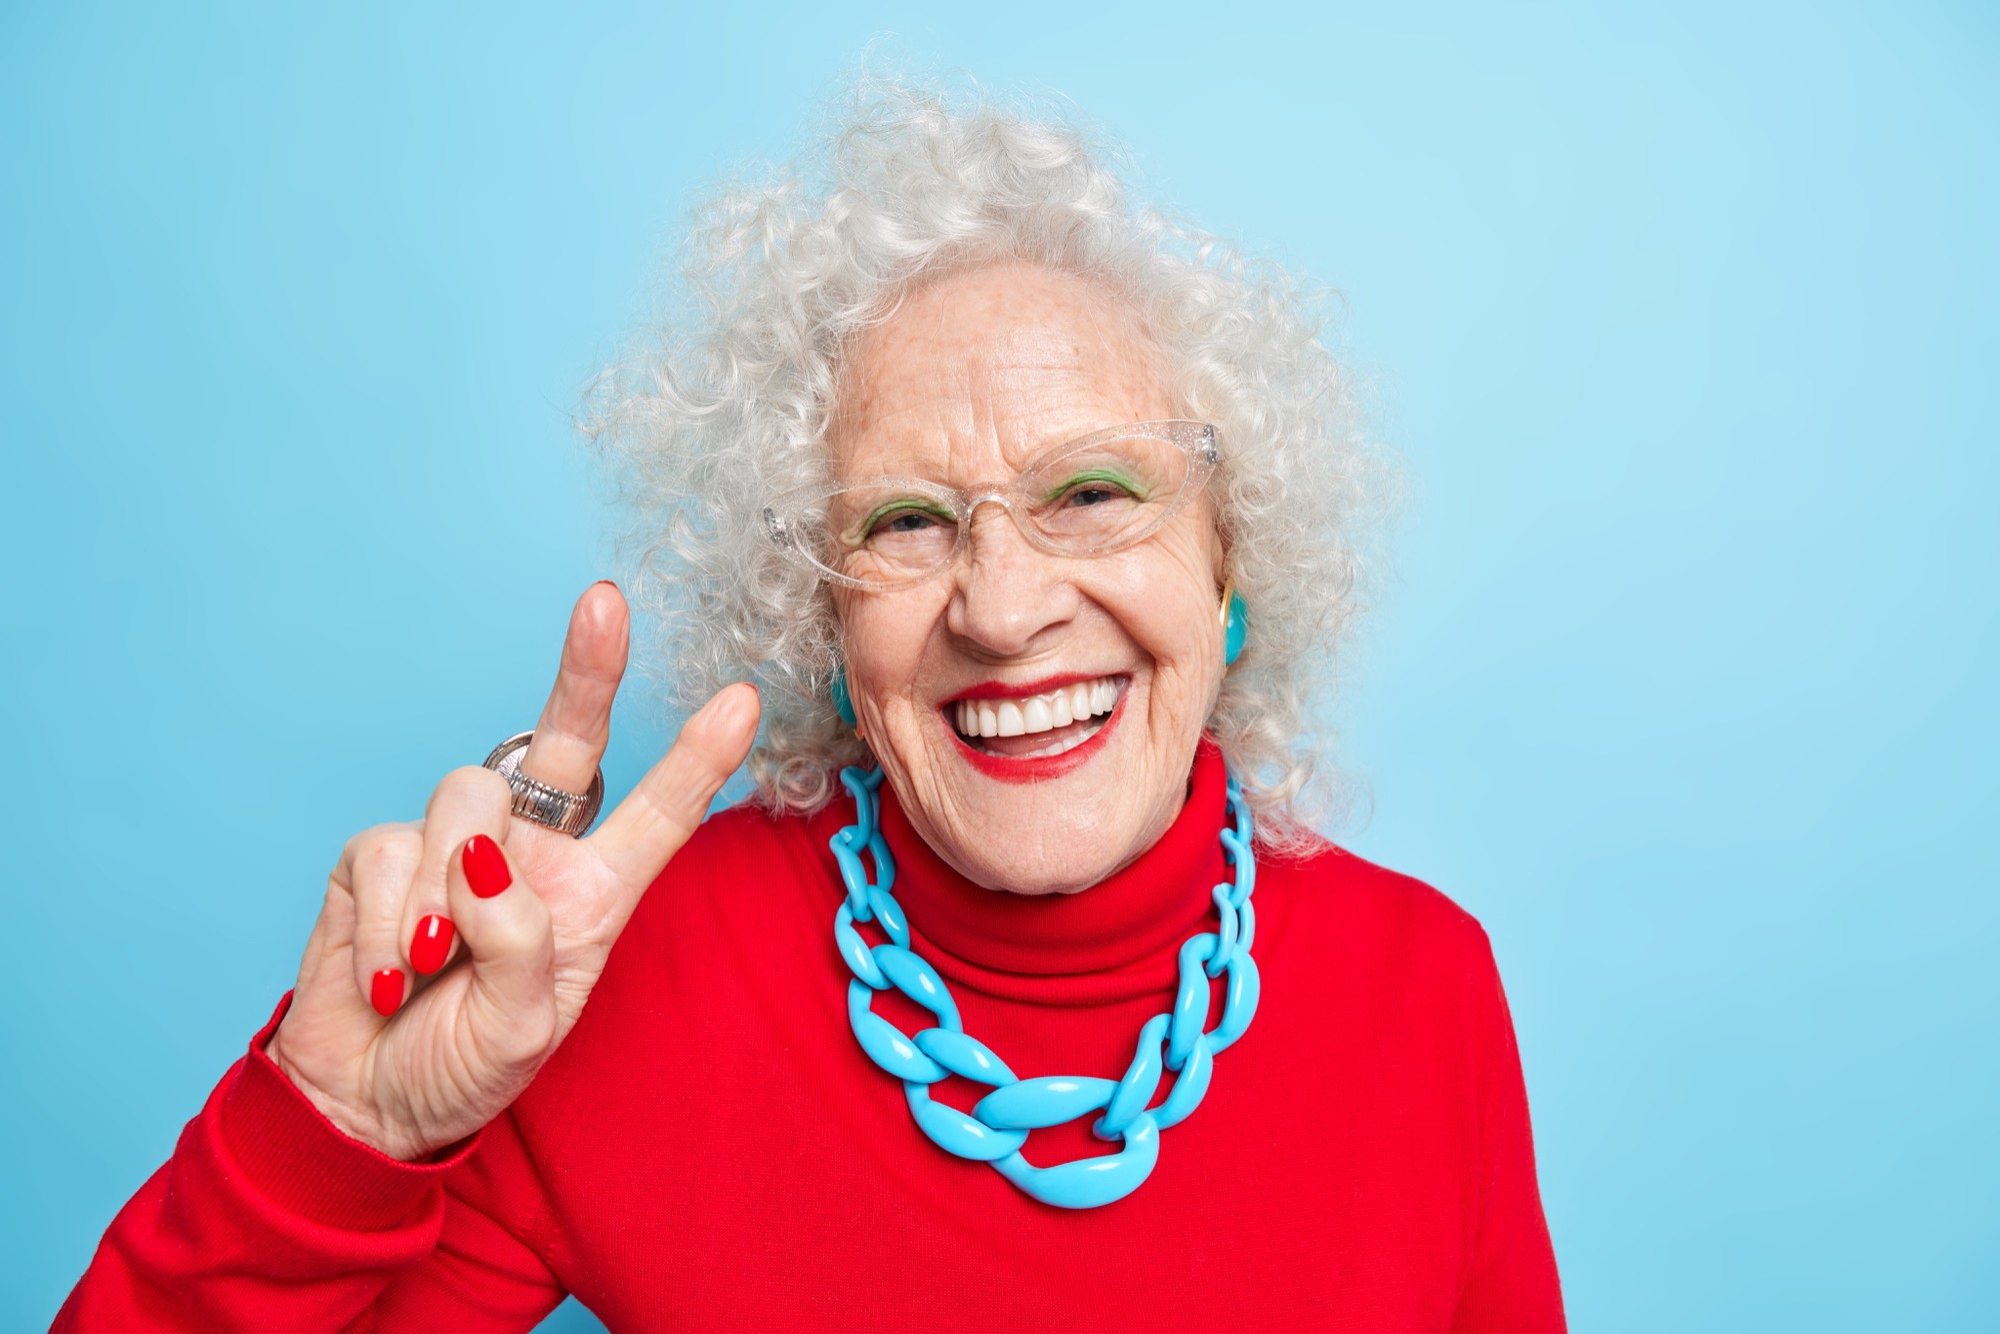 An elderly smiling and joyful woman showing the peace sign wearing a red sweater